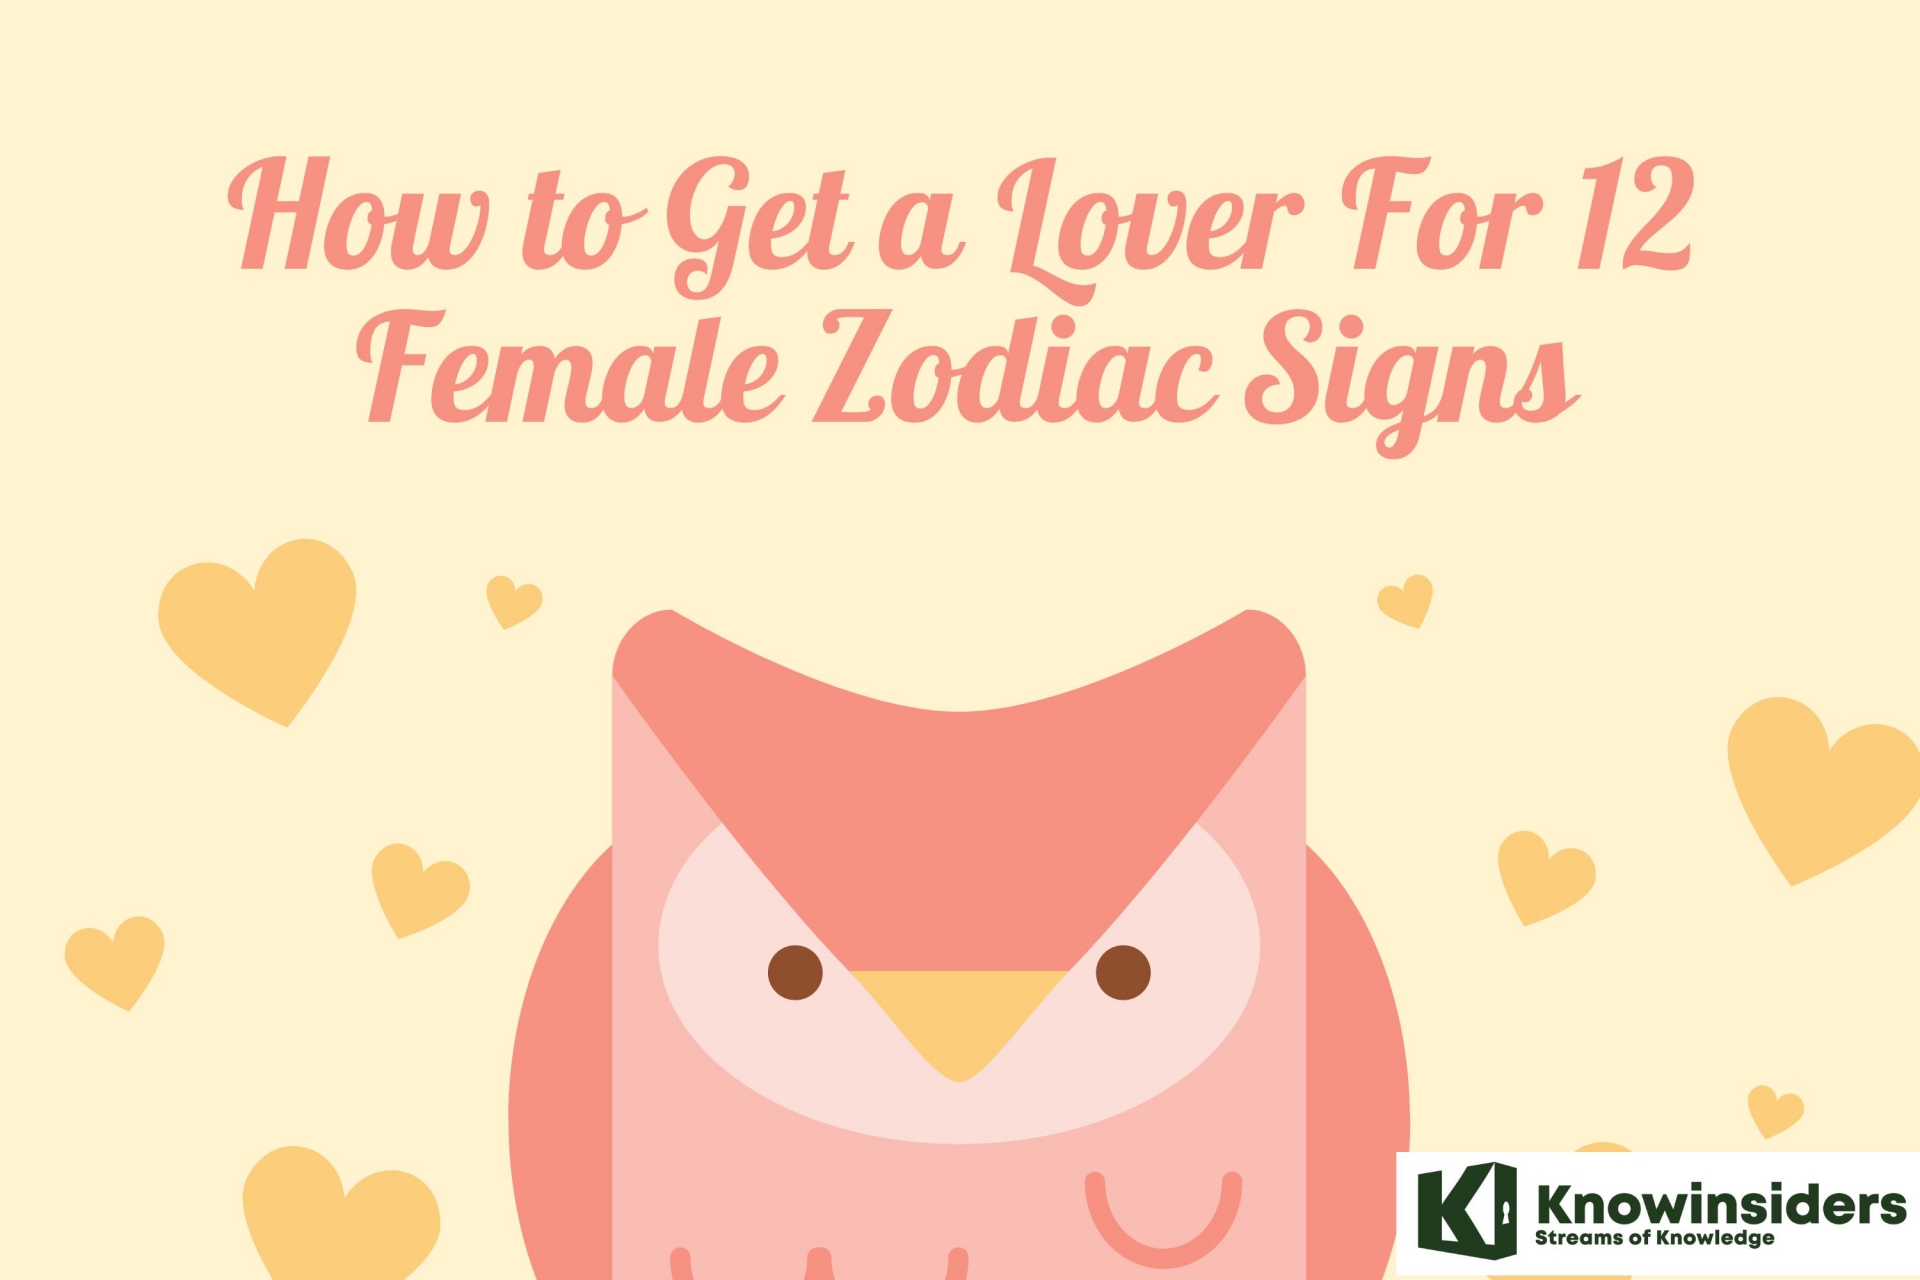 How to Get a Lover For 12 Female Zodiac Signs